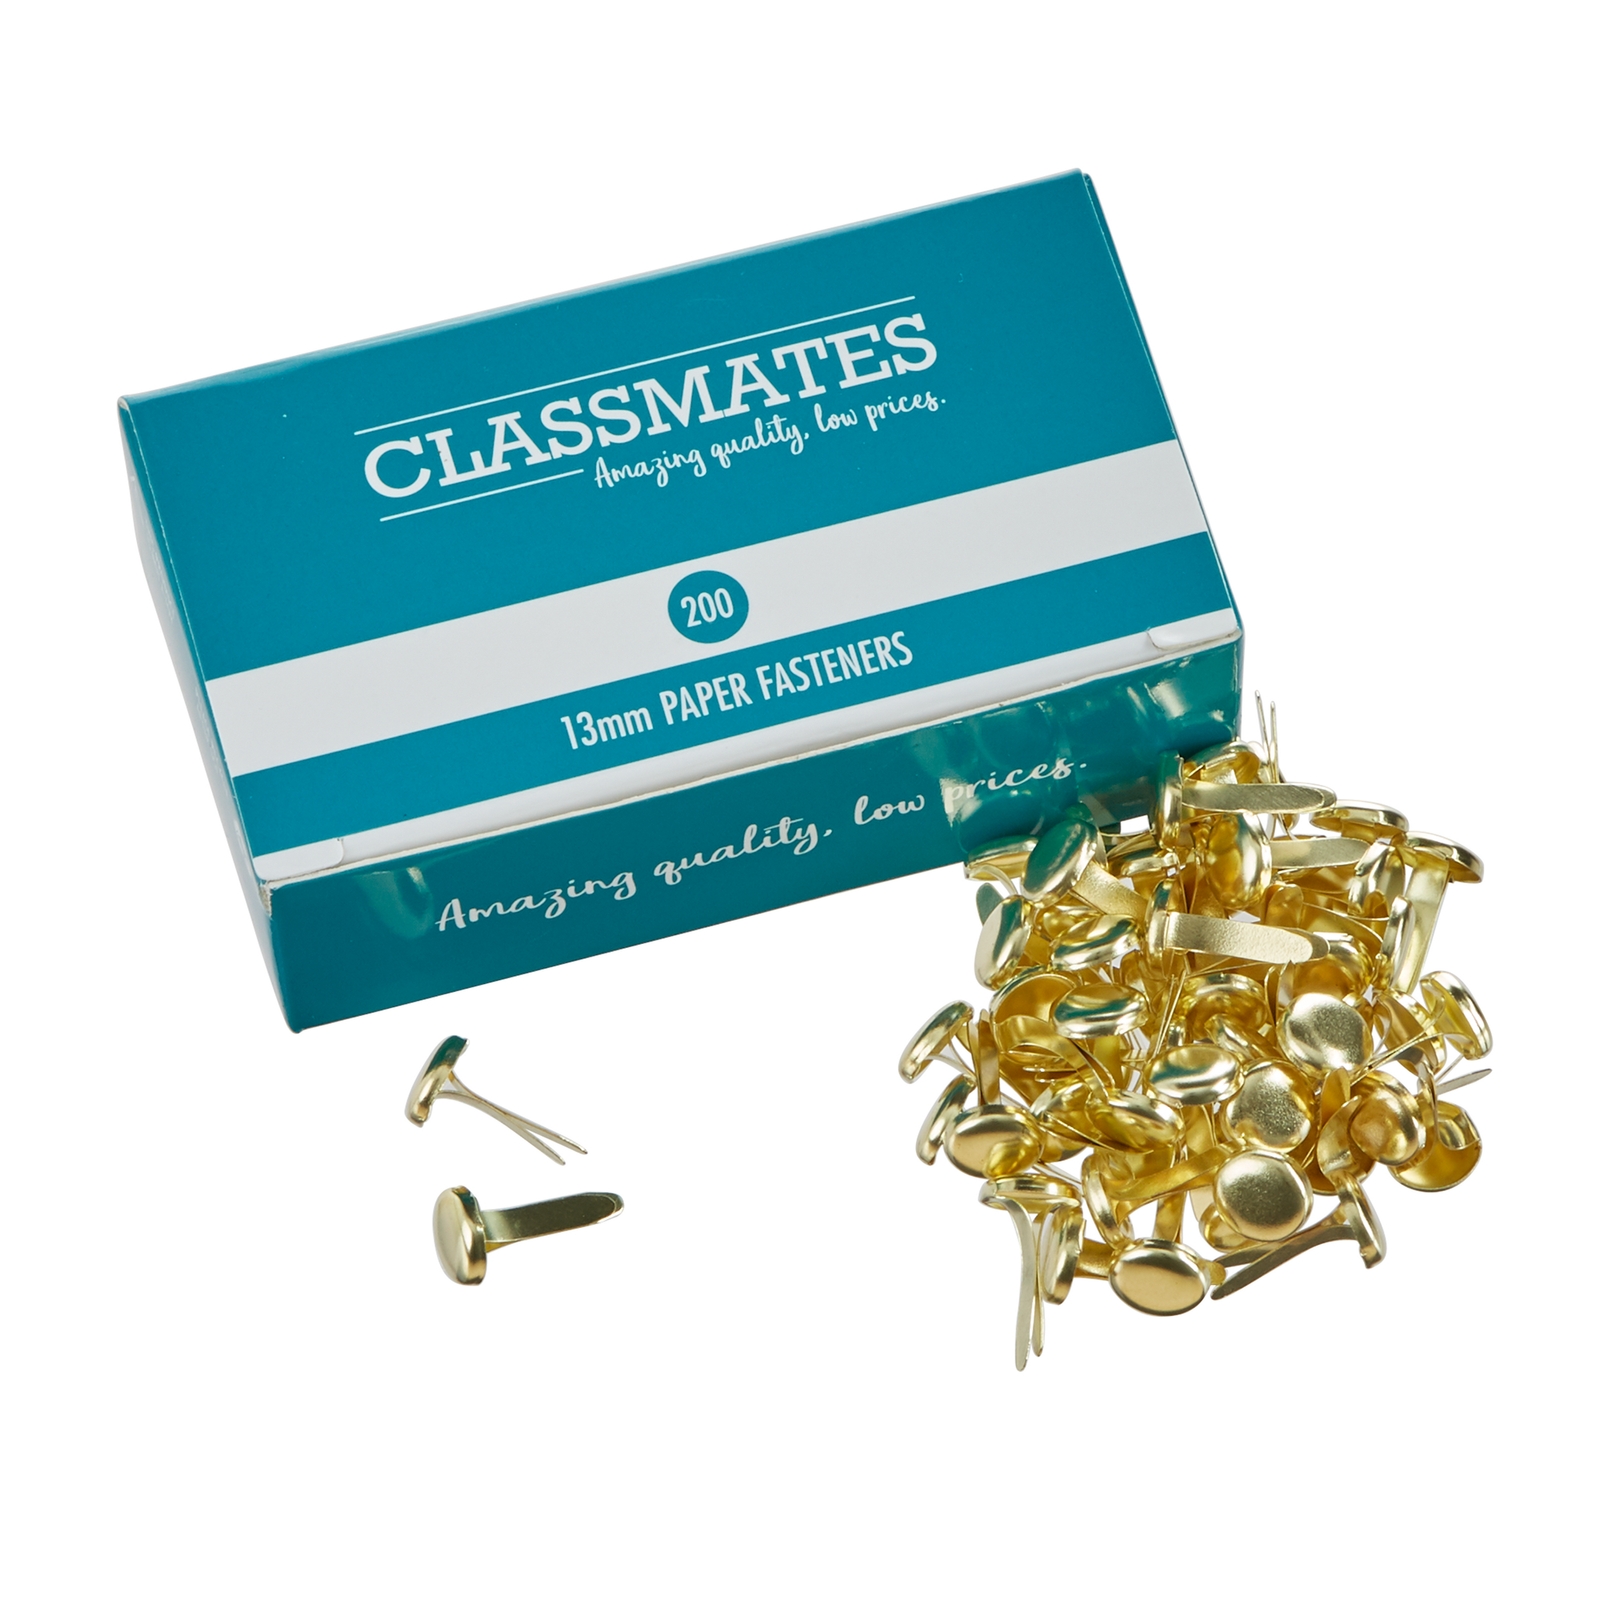 Classmates Paper Fasteners 13mm - Pack of 200